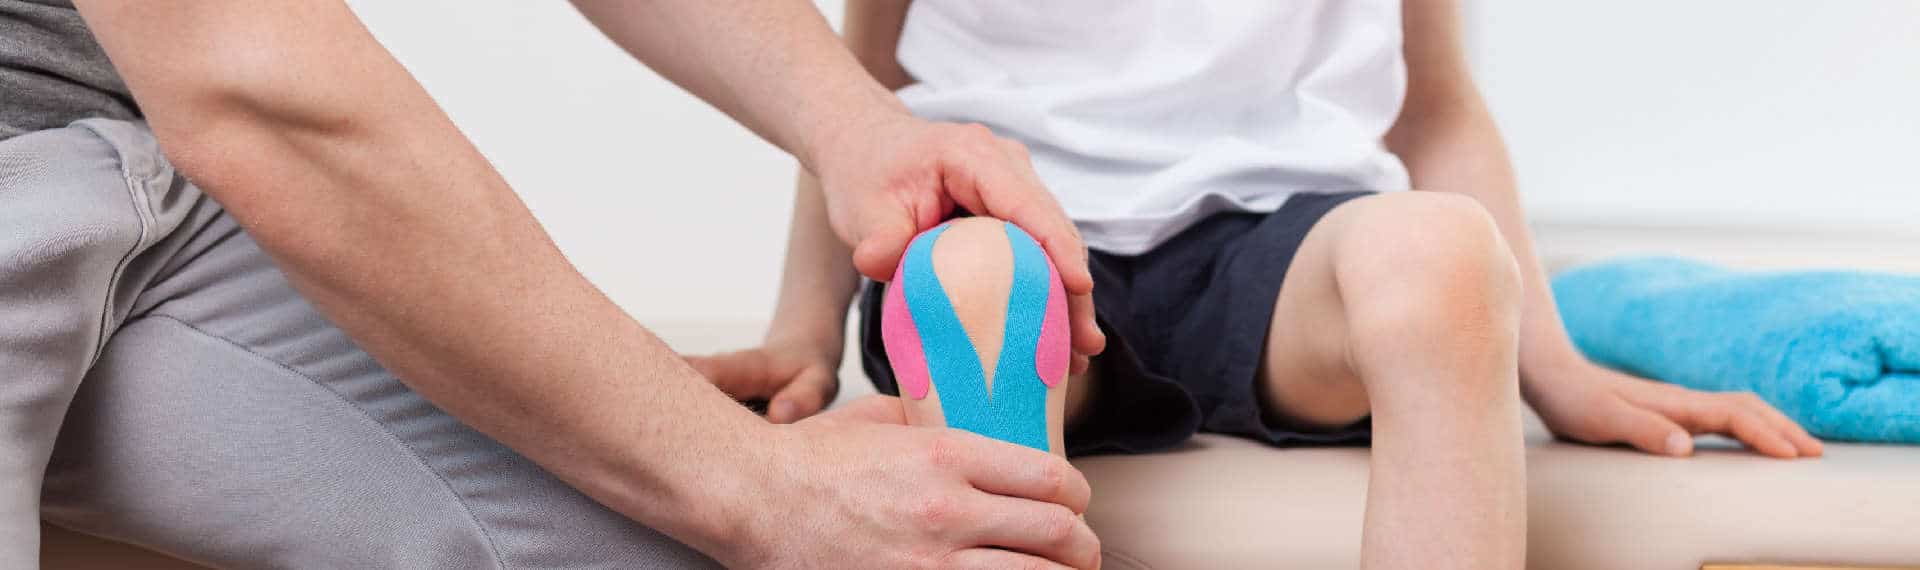 KT tape therapeutic kinesiology